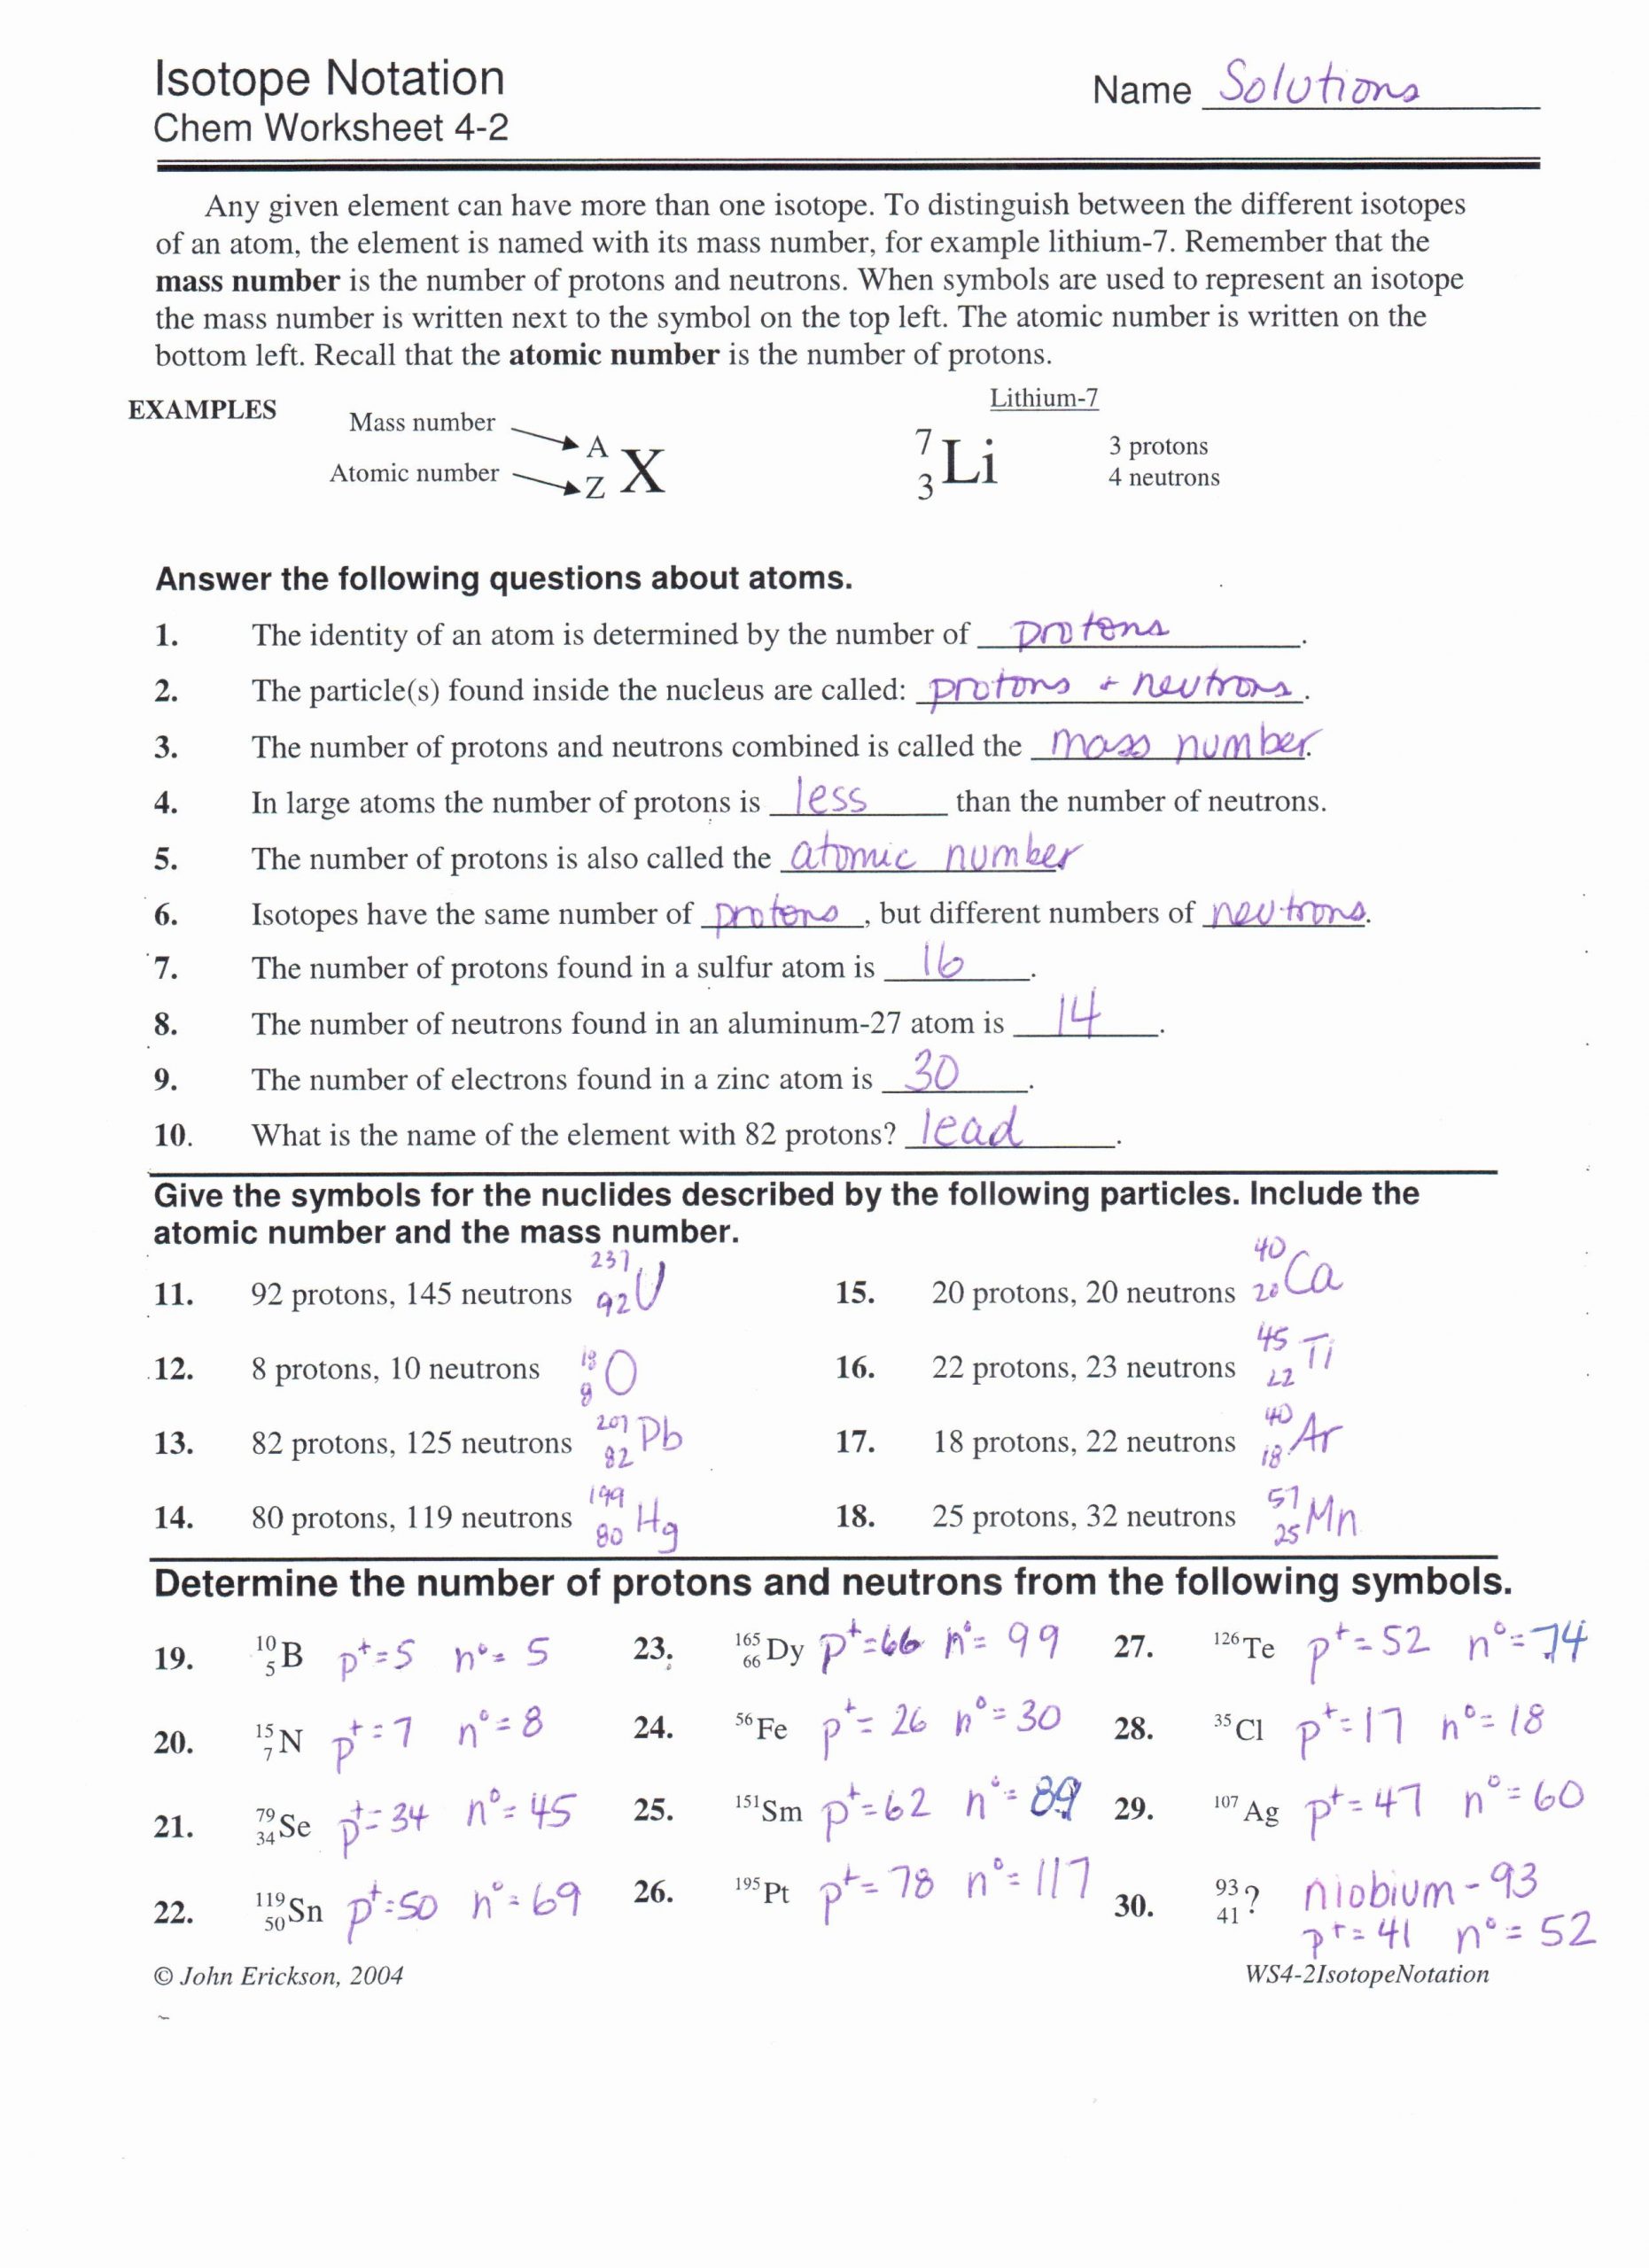 Atoms and isotopes Worksheet Answers Pin On Customize Design Worksheet Line